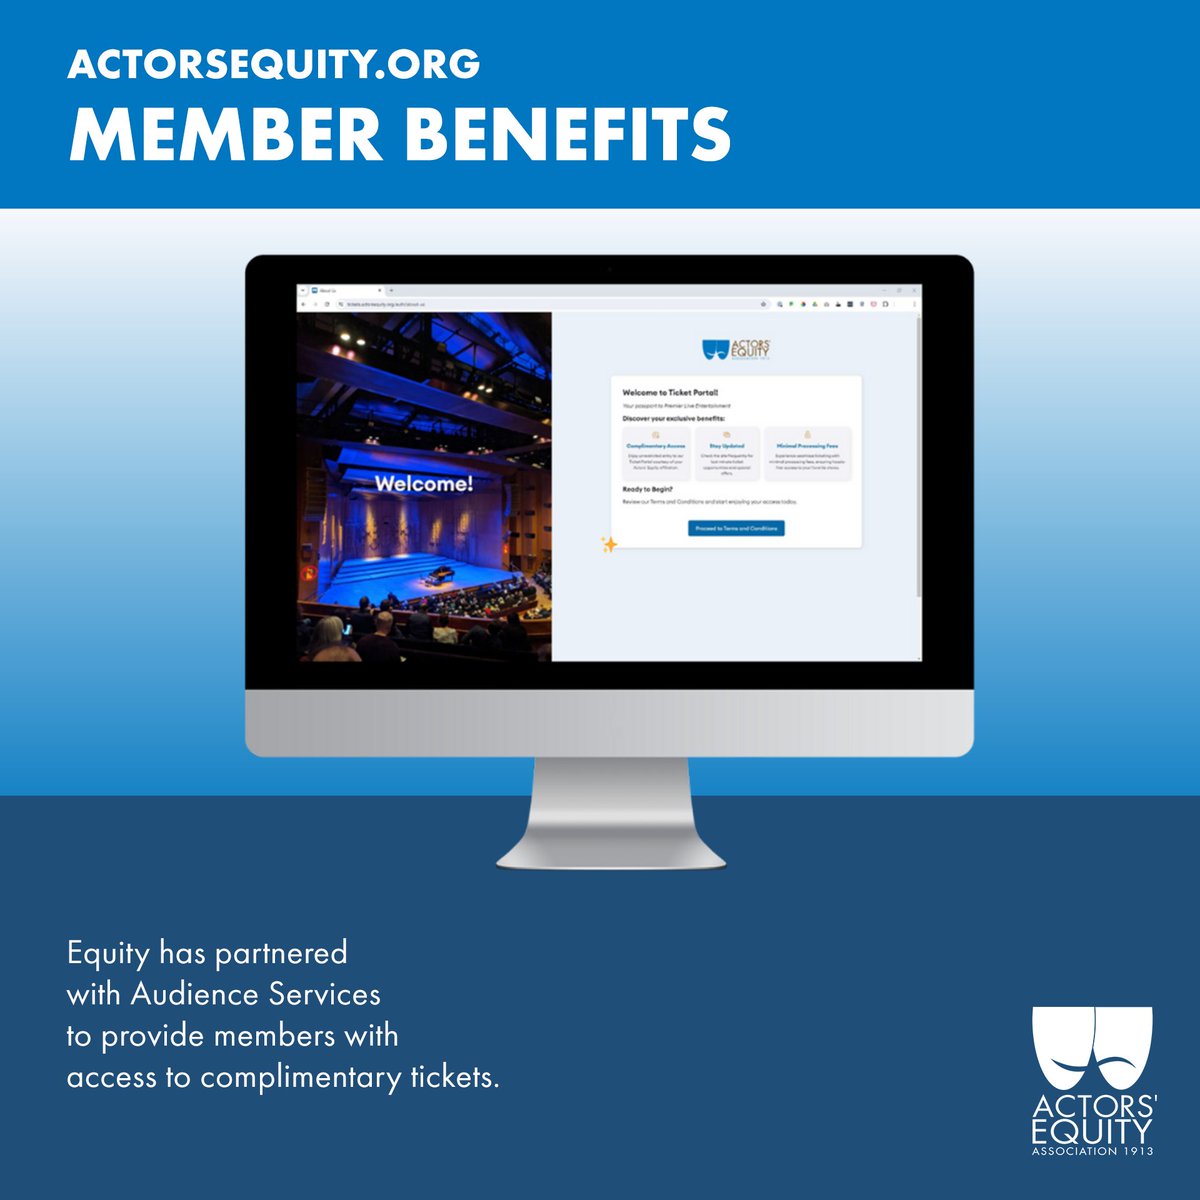 Equity has partnered with Audience Services to bring their seat-filling service to Equity members, and the member value department is working to expand this service nationally. Learn more by visiting the Benefits page on the member portal. members.actorsequity.org/benefits